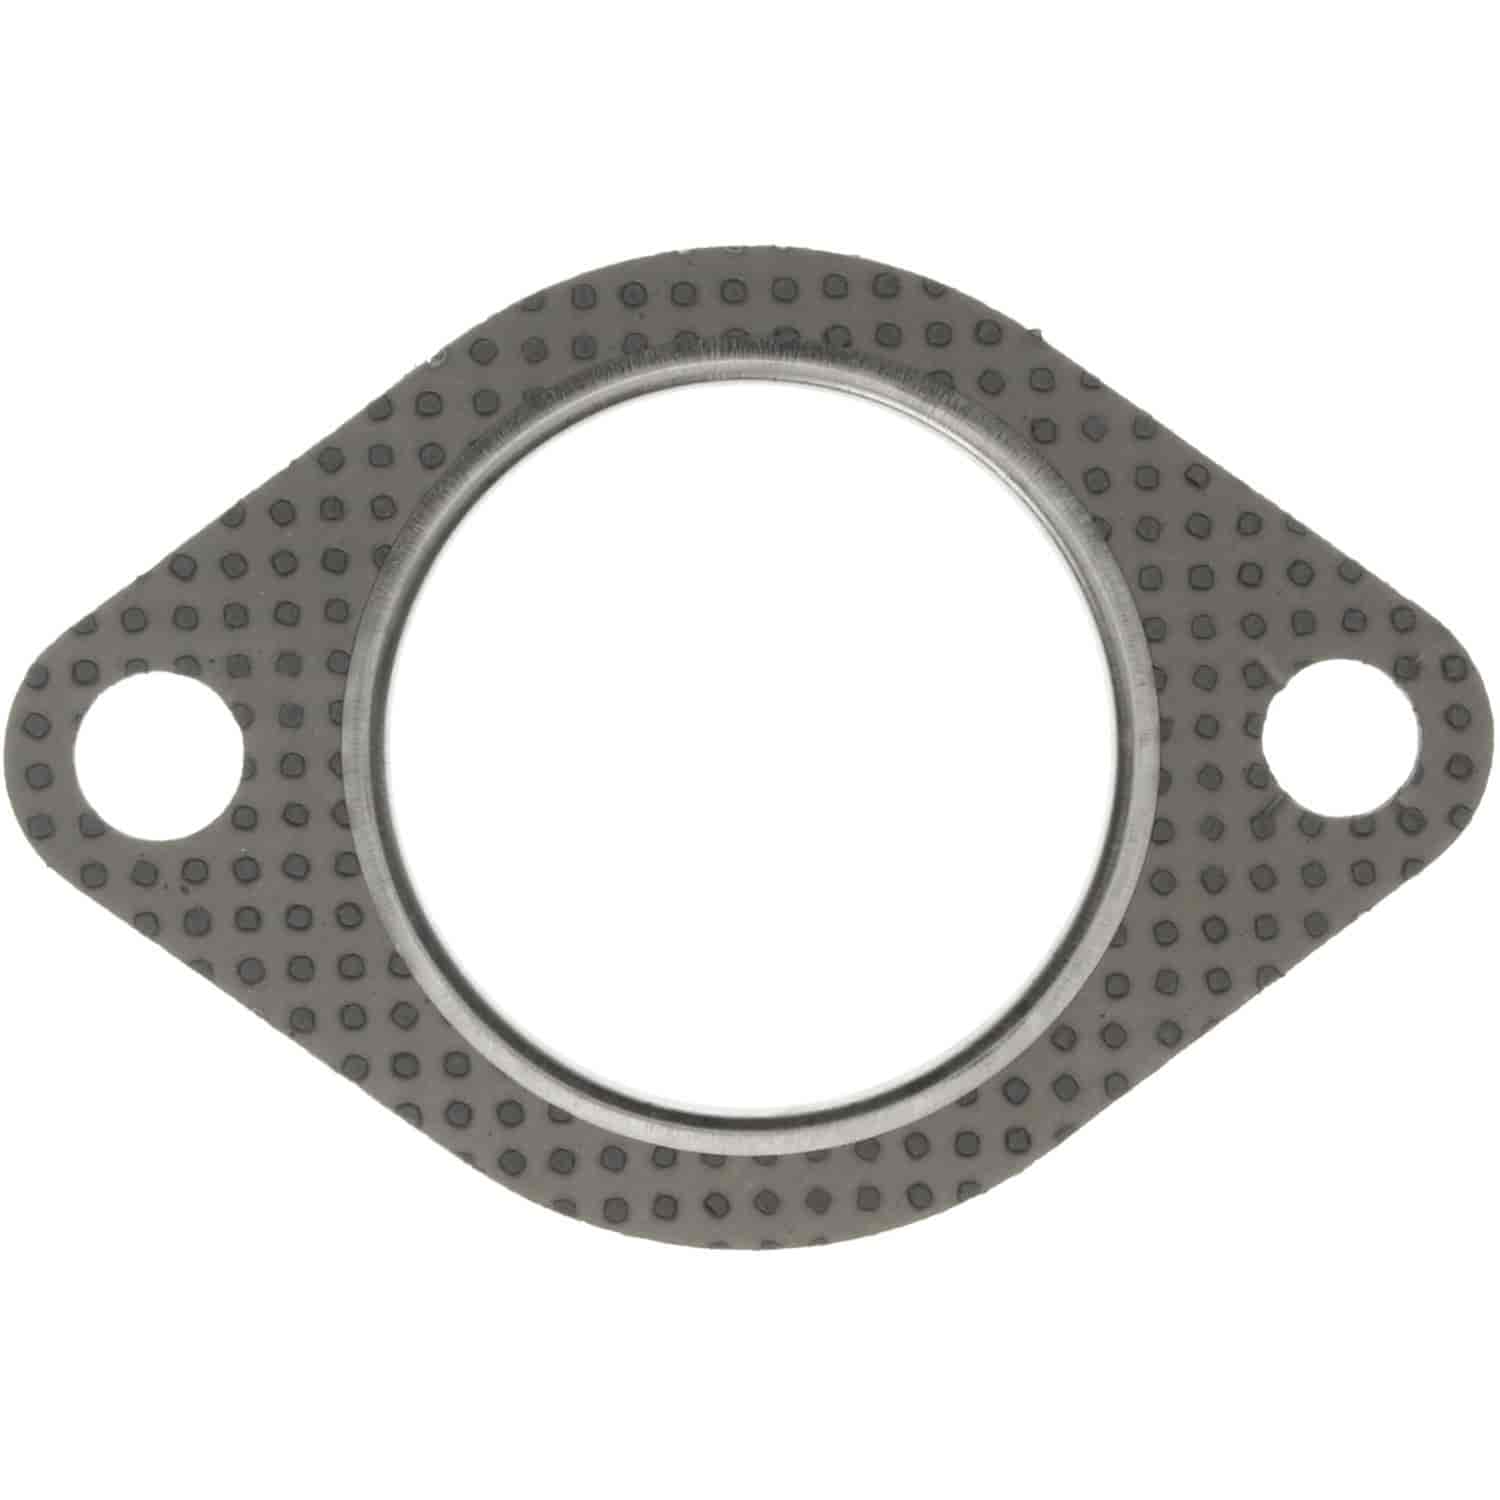 Catalytic Converter Gasket for Hyundai Excel w/1.5L 4